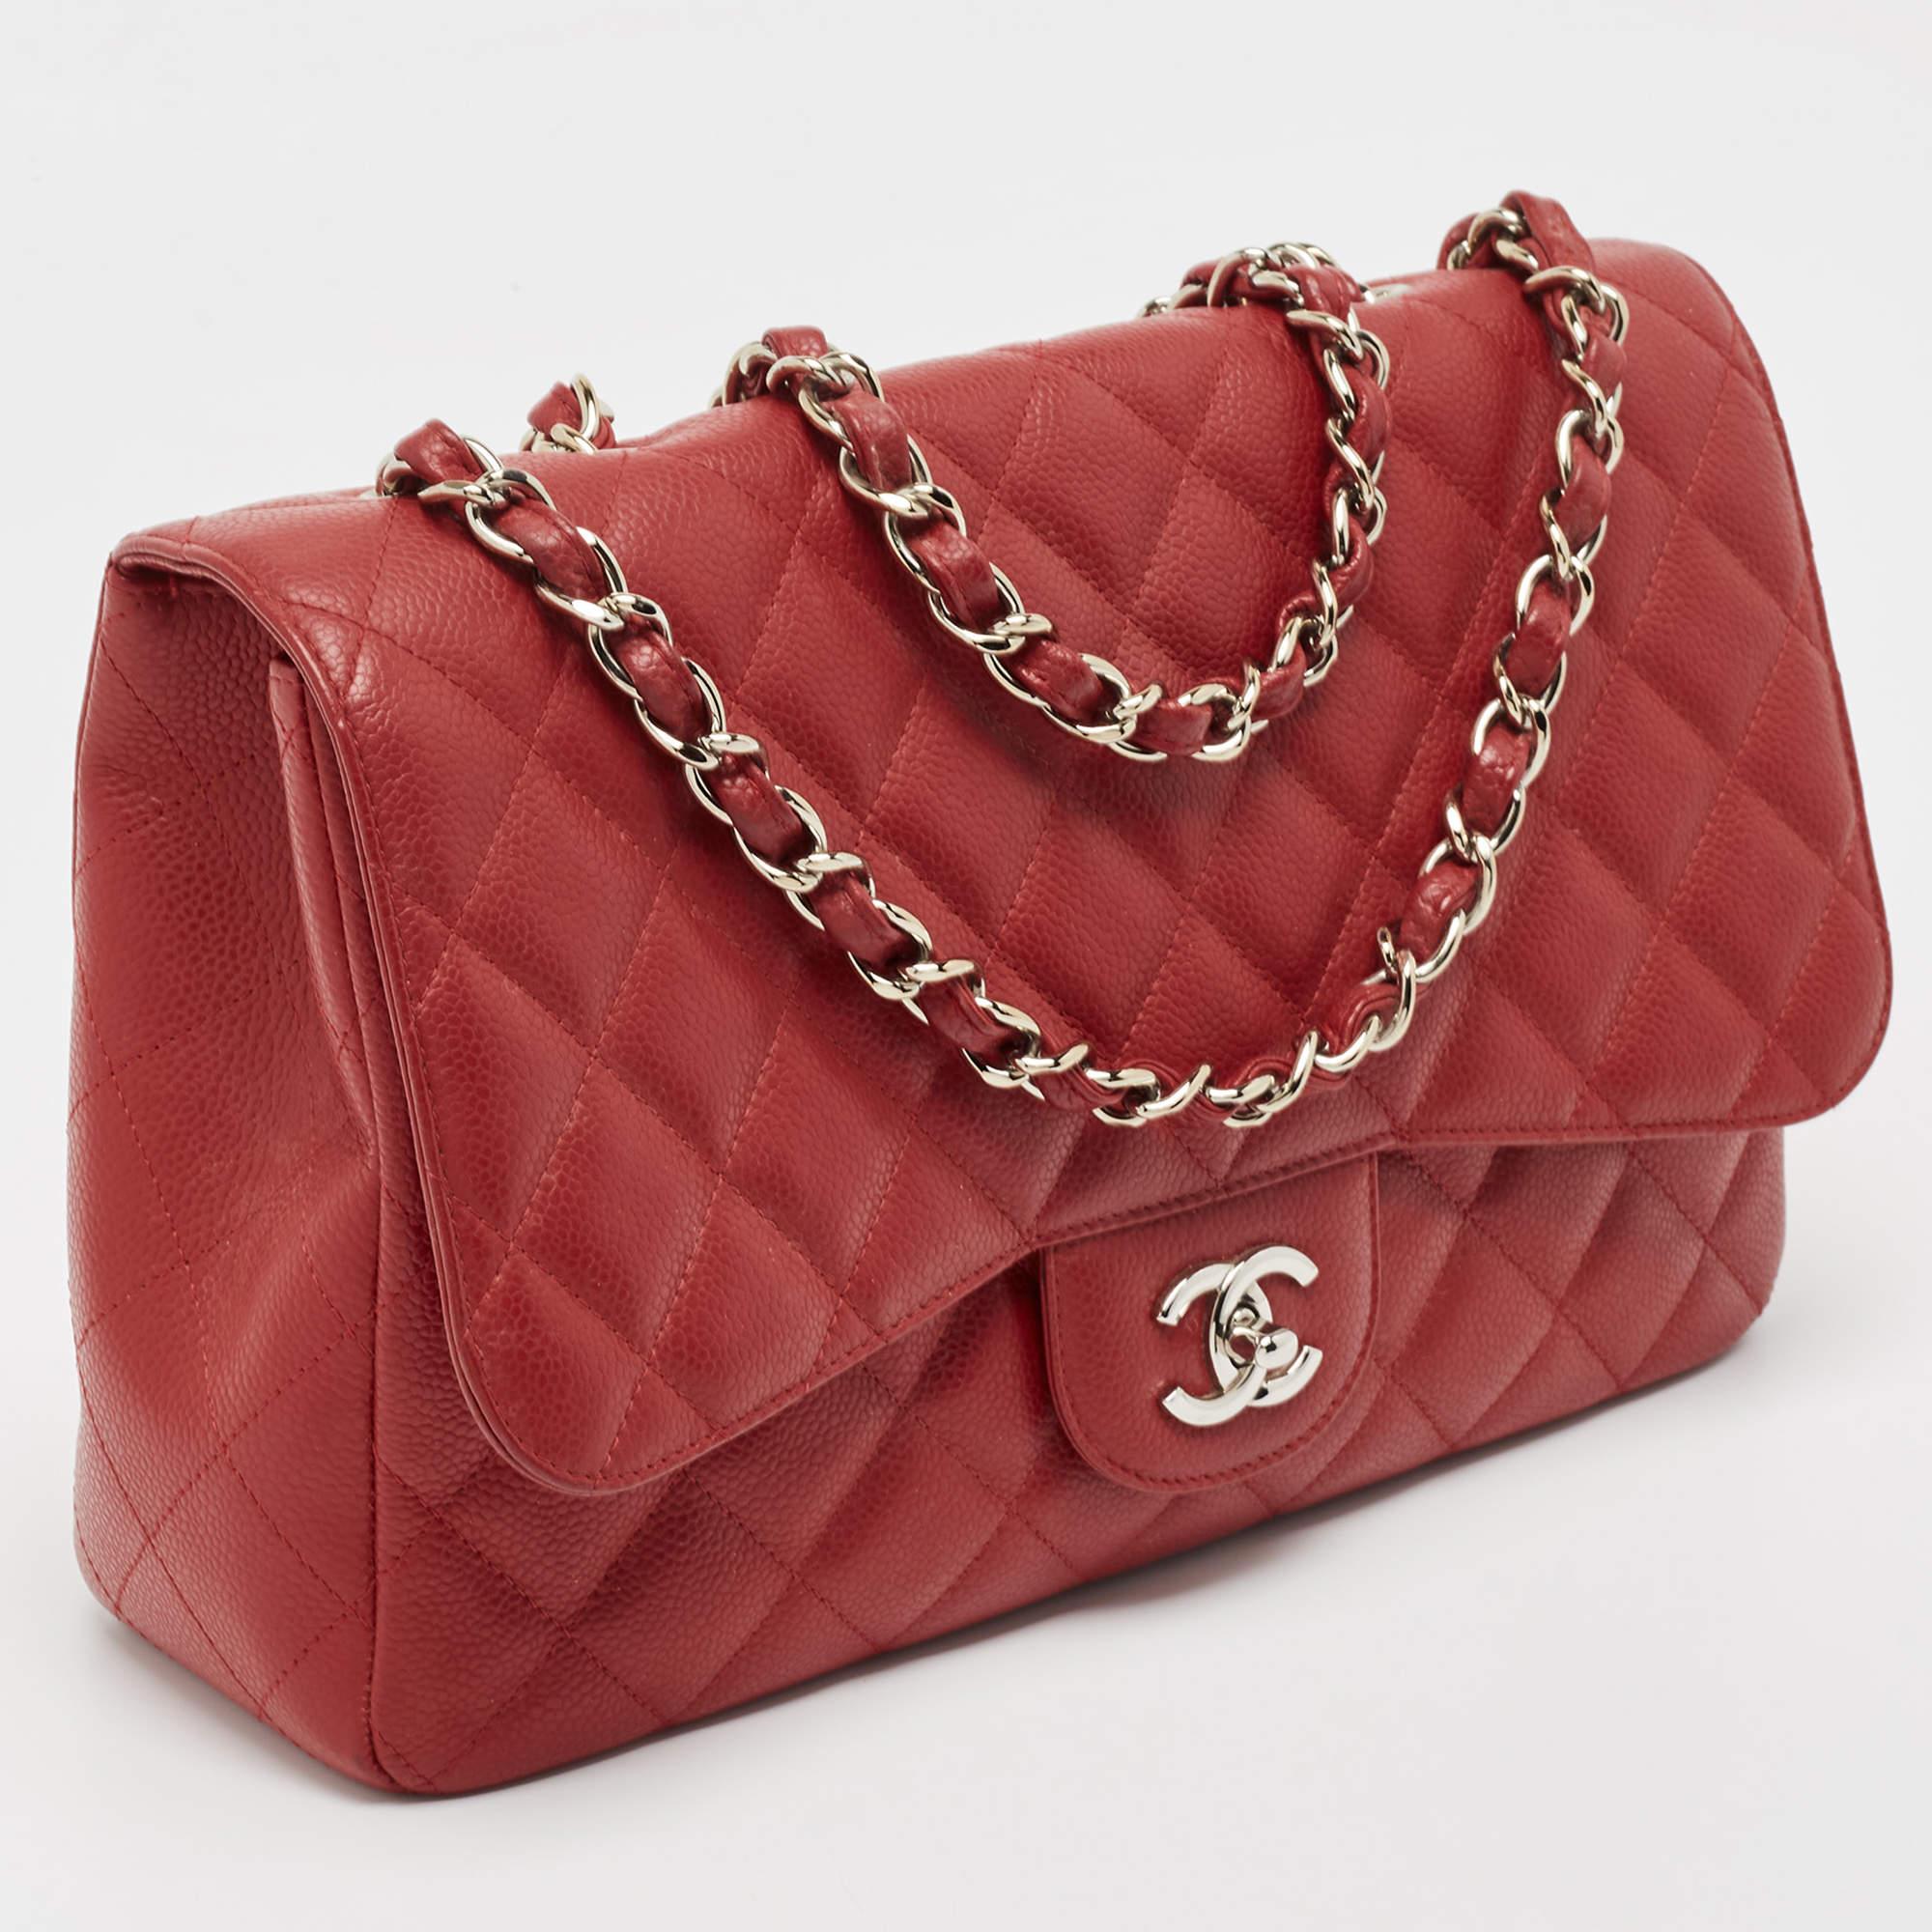 Chanel Red Quilted Caviar Leather Jumbo Classic Single Flap Bag In Good Condition For Sale In Dubai, Al Qouz 2